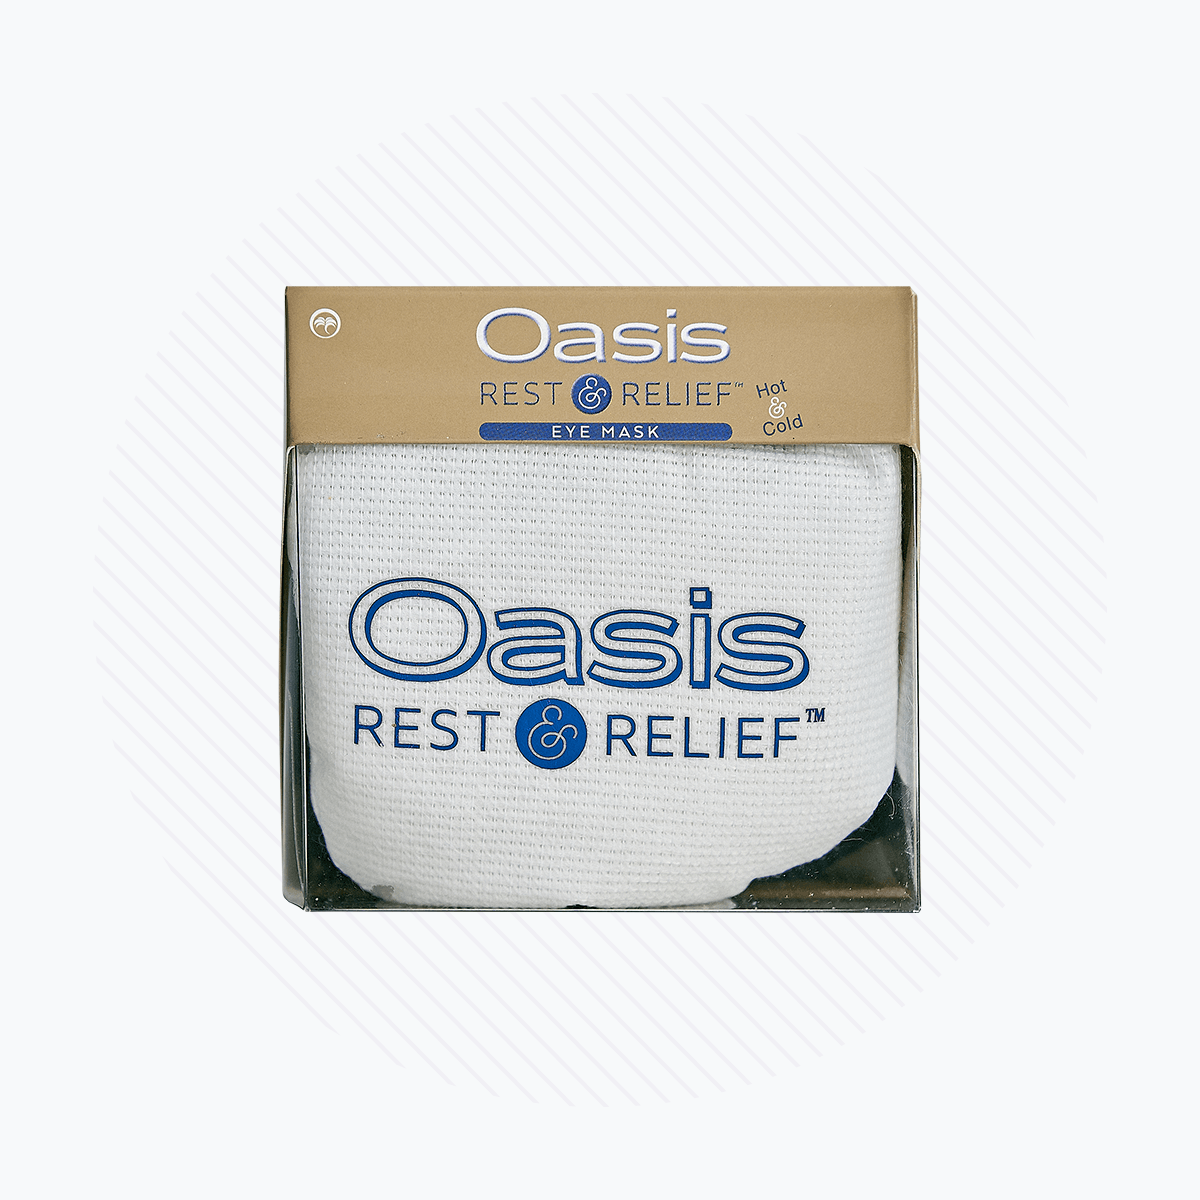 Oasis Hot & Cold Dry Eye & Allergy Mask - DryEye Rescue Store